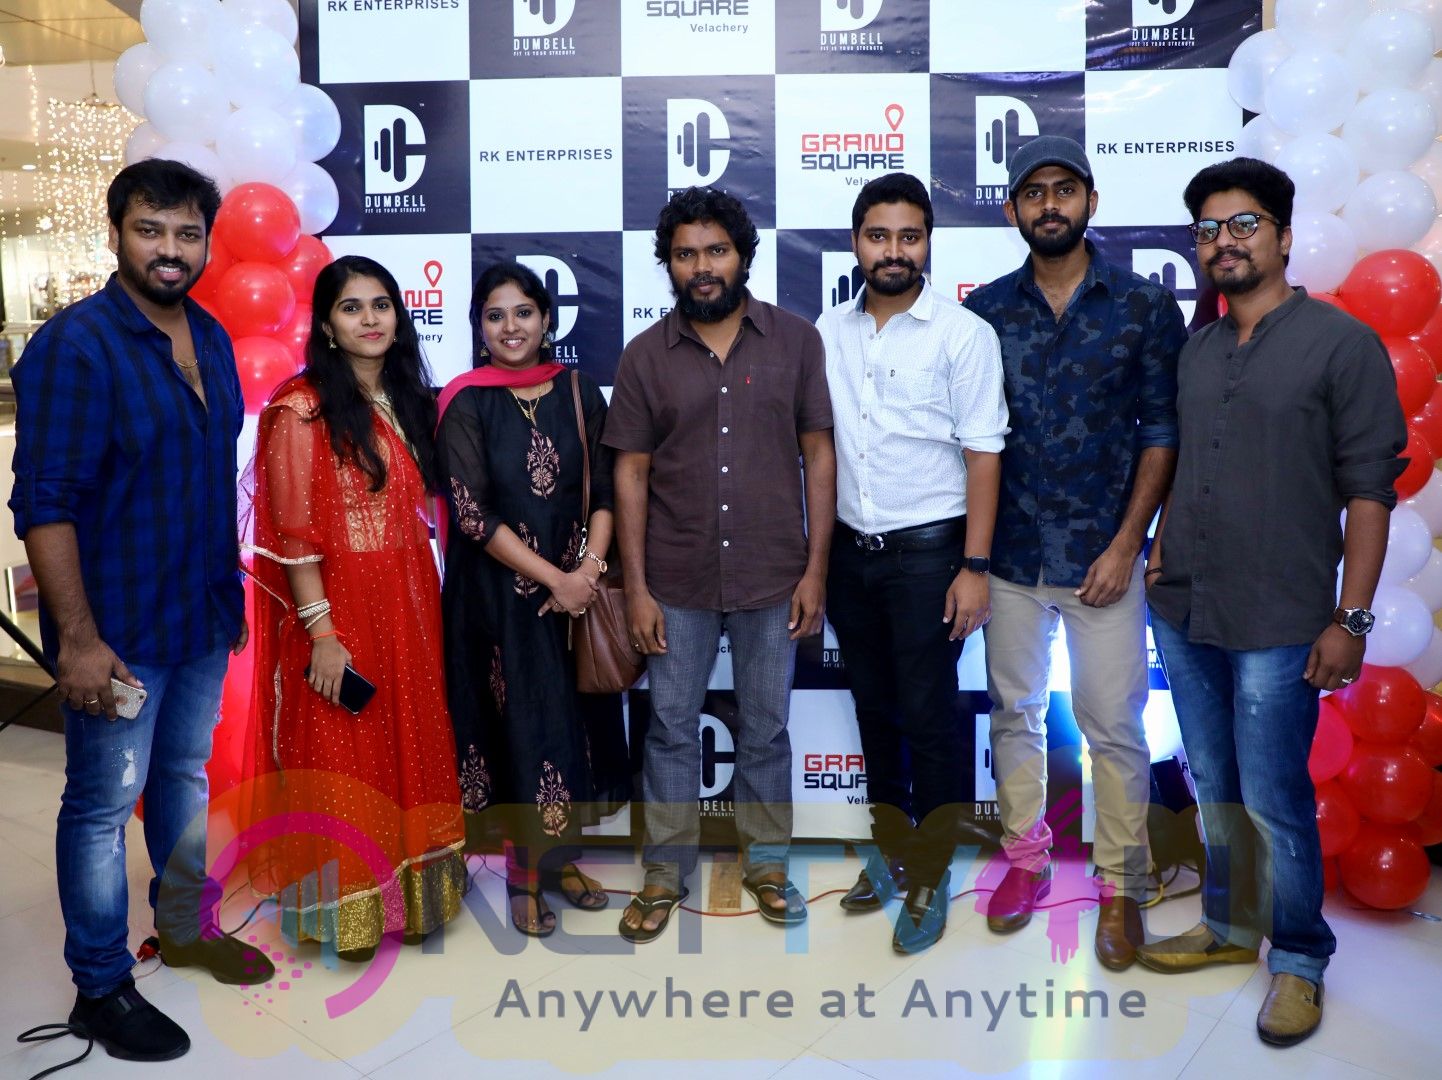 Dumbell 1st Outlet Inauguration In Chennai Photos Tamil Gallery